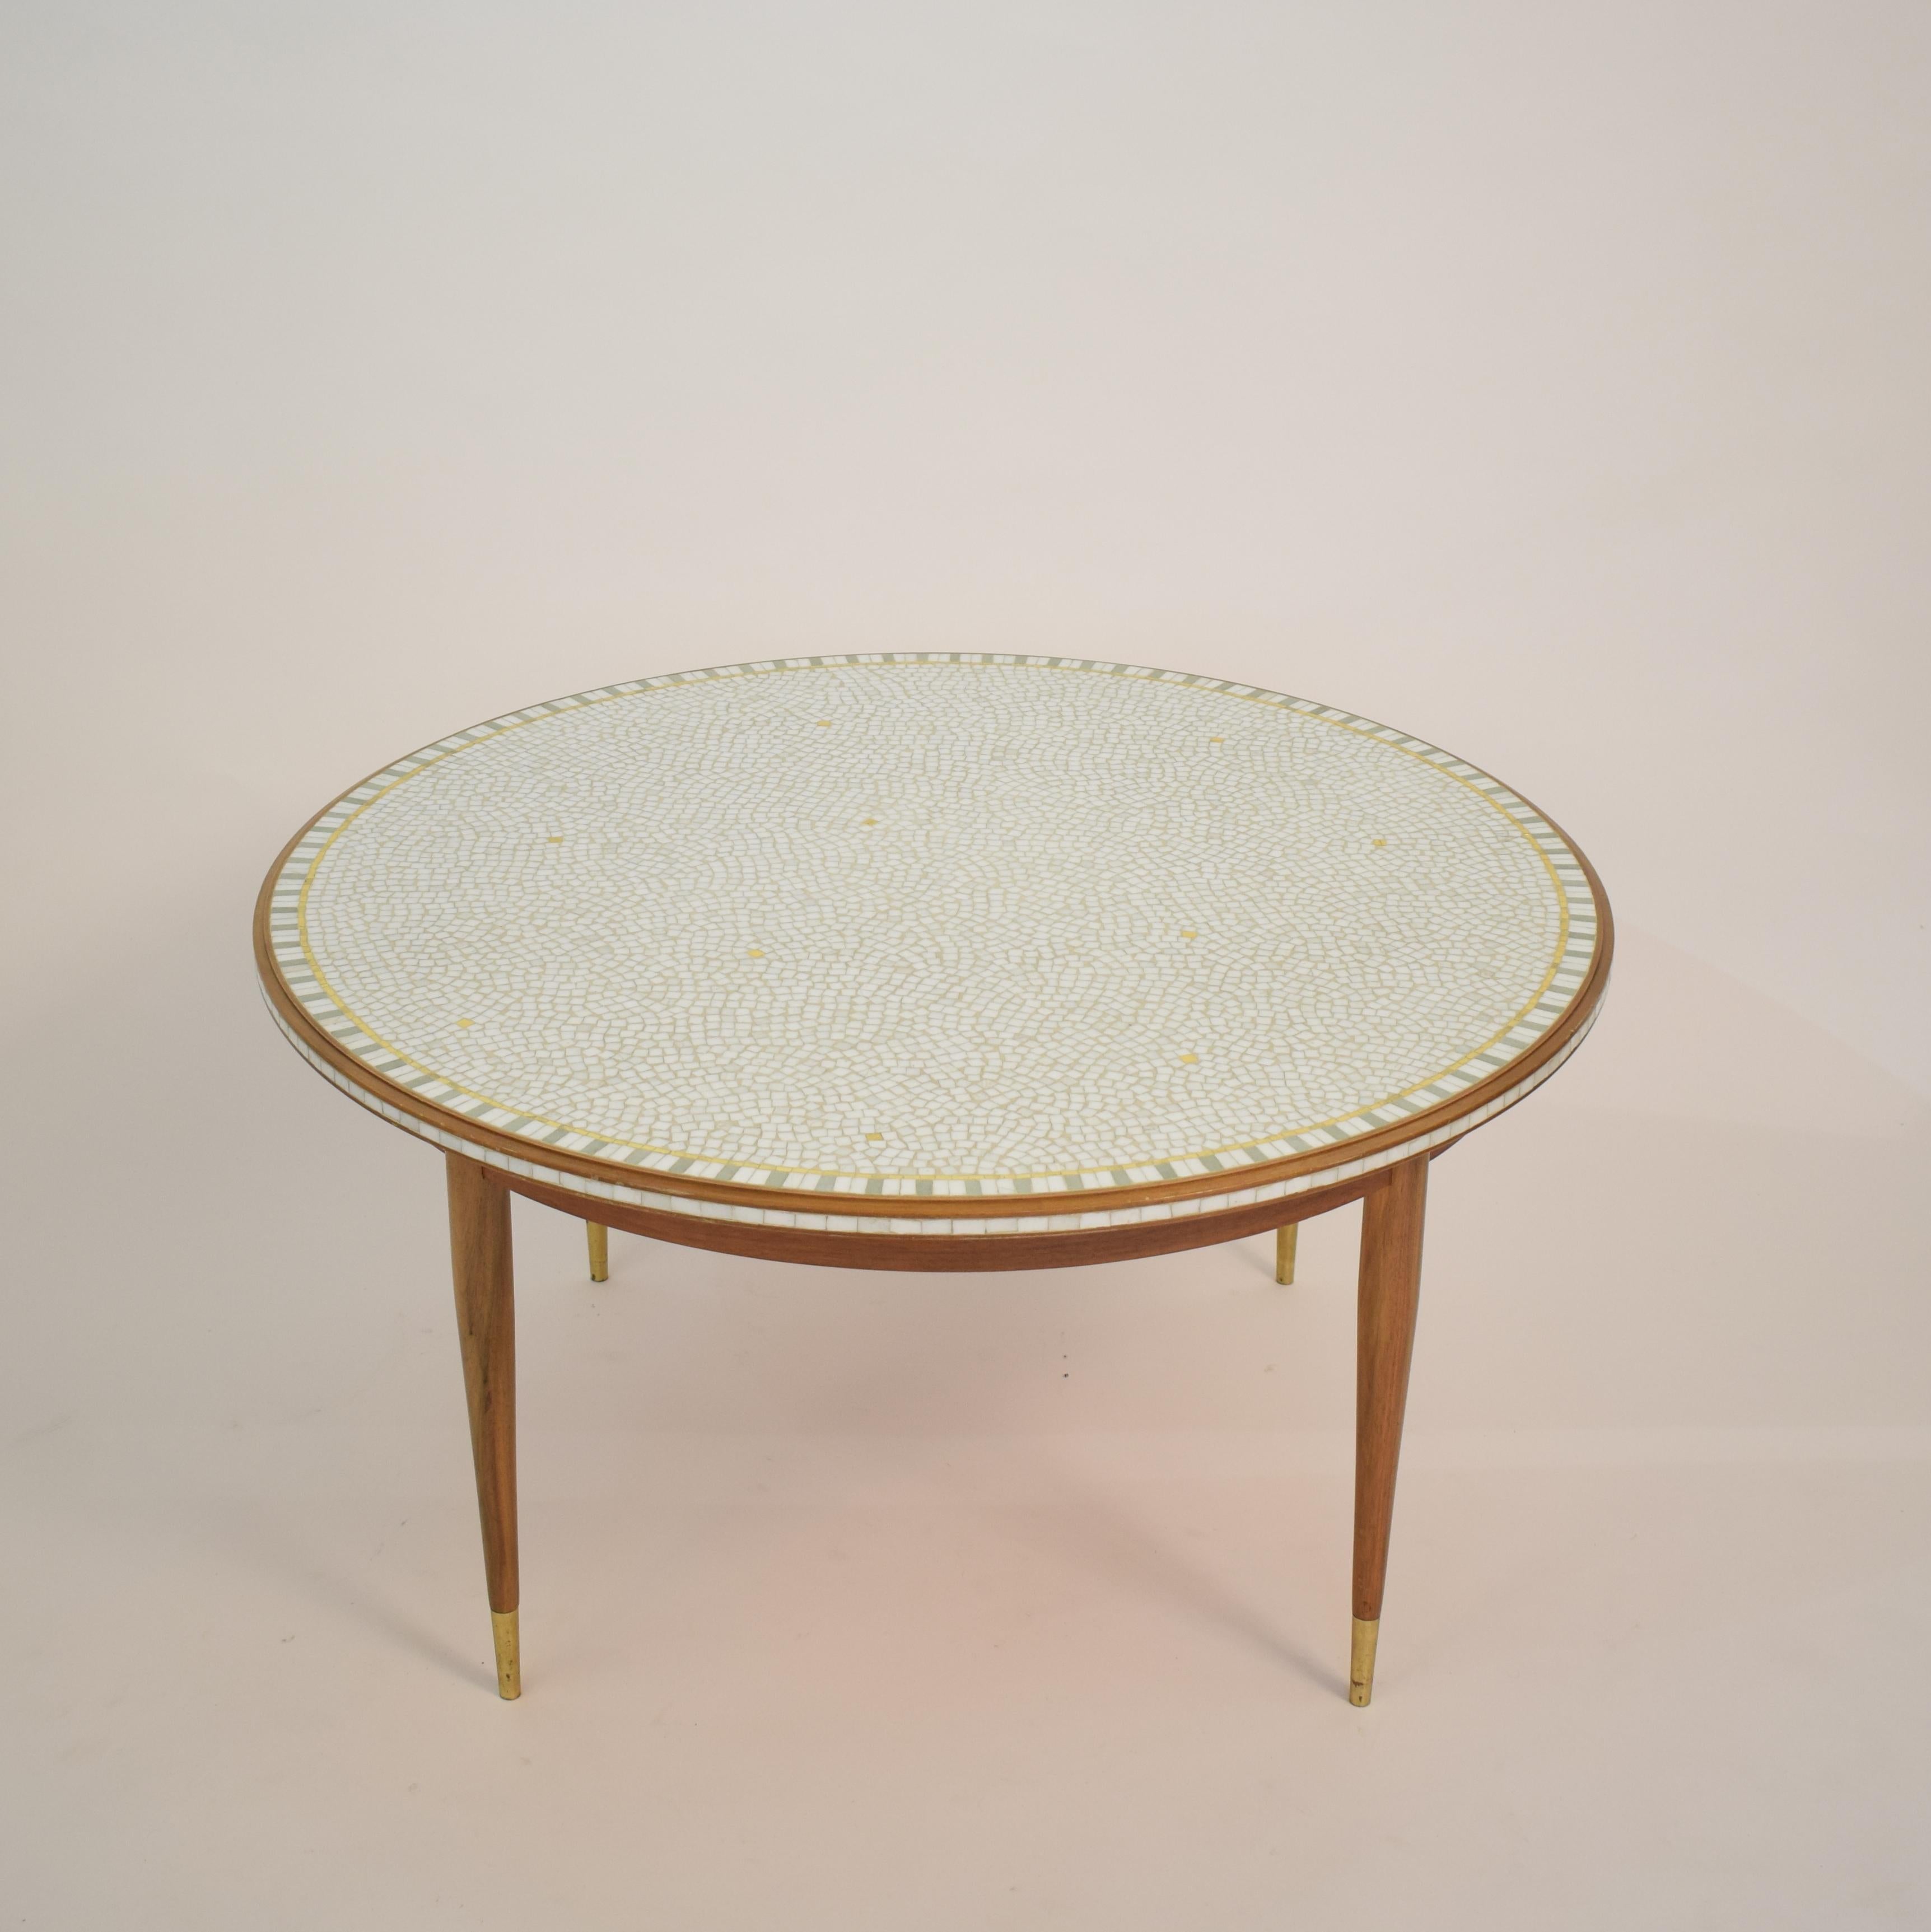 German Midcentury Round Mosaic Coffee Table by Berthold Müller, 1960s